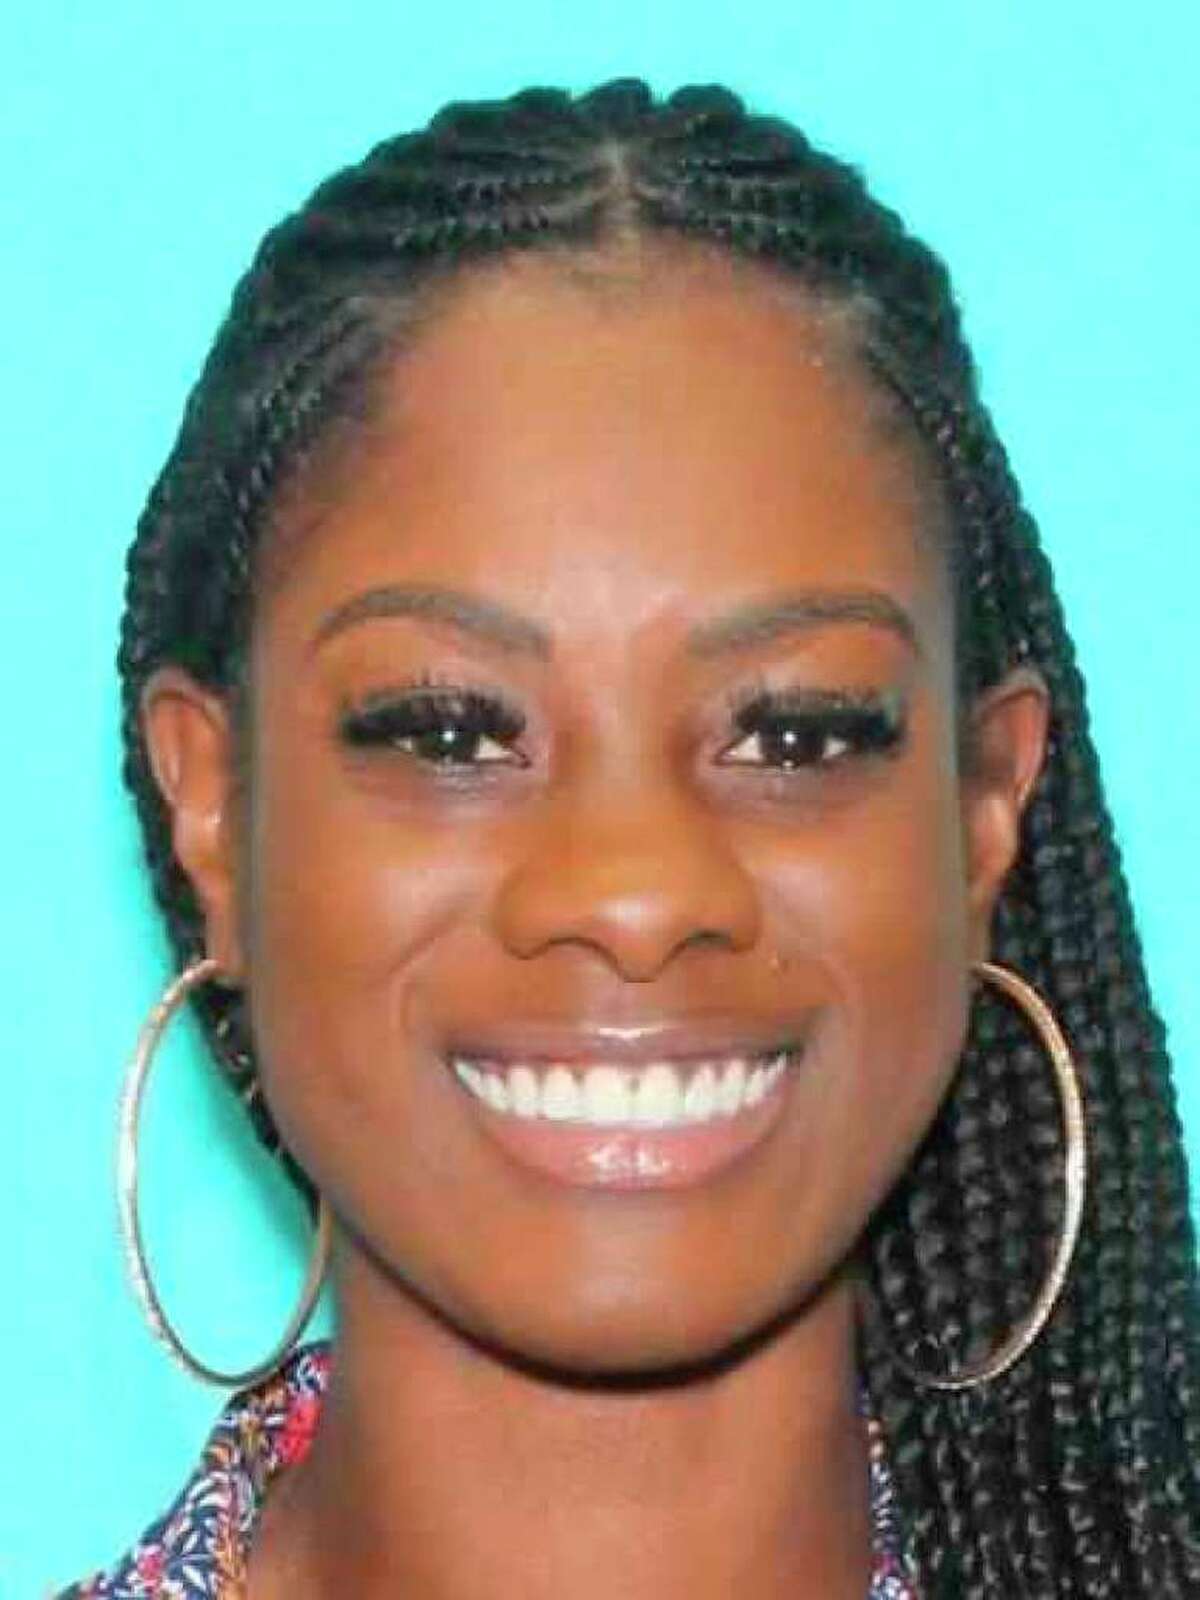 Andreen Nicole McDonald, 29, a San Antonio business owner and mother, was last seen alive on Feb. 28. Her mother and several friends reported her missing the next day. After her body was found in July, her husband, Andre Sean McDonald, was arrested on a charge of murder.